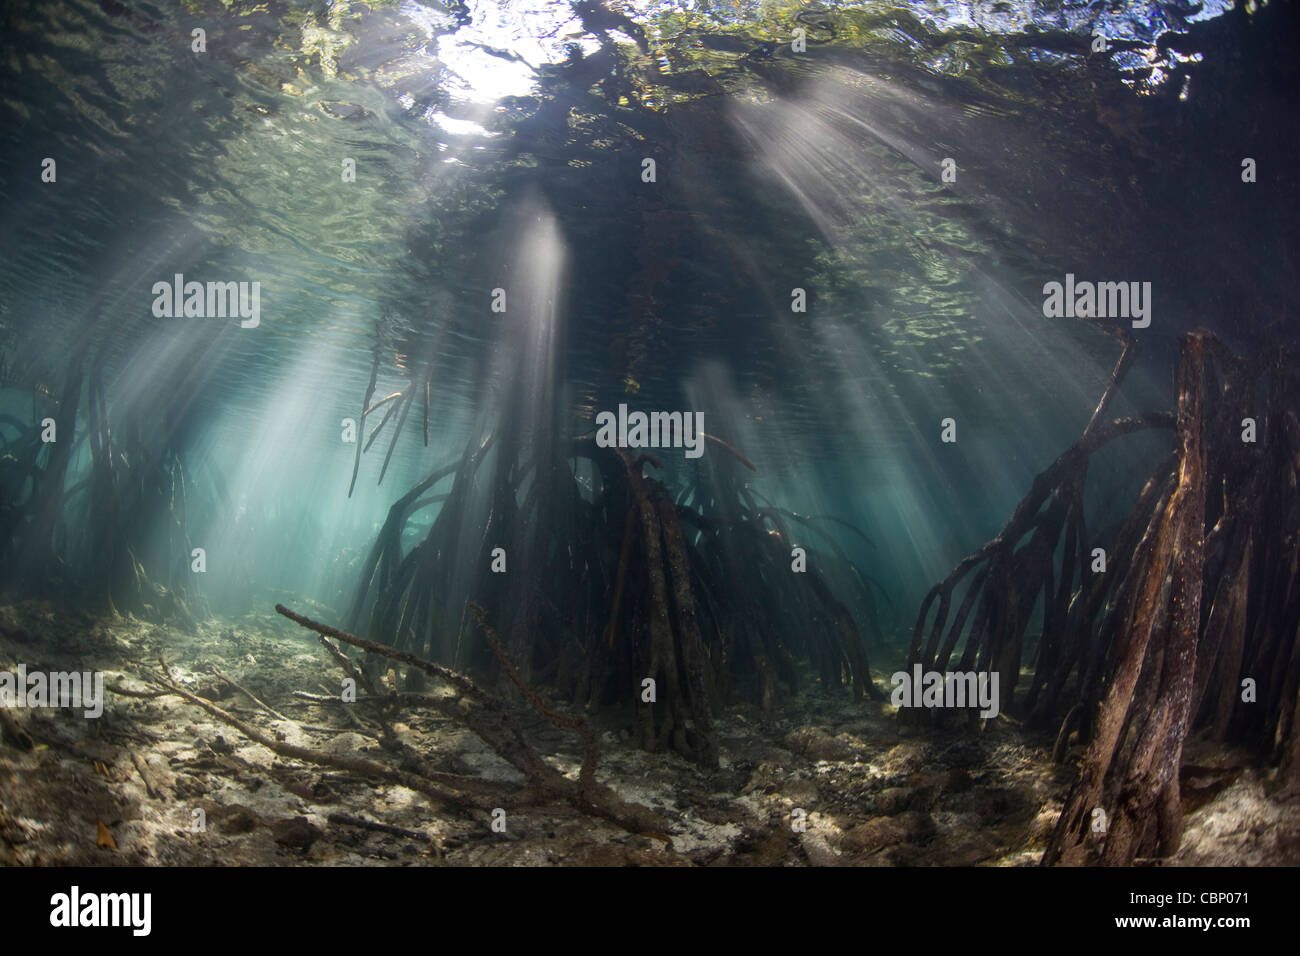 Beams of sunlight penetrate the waters of a mangrove forest. The prop roots  provide nursery habitat for fish and invertebrates. Stock Photo